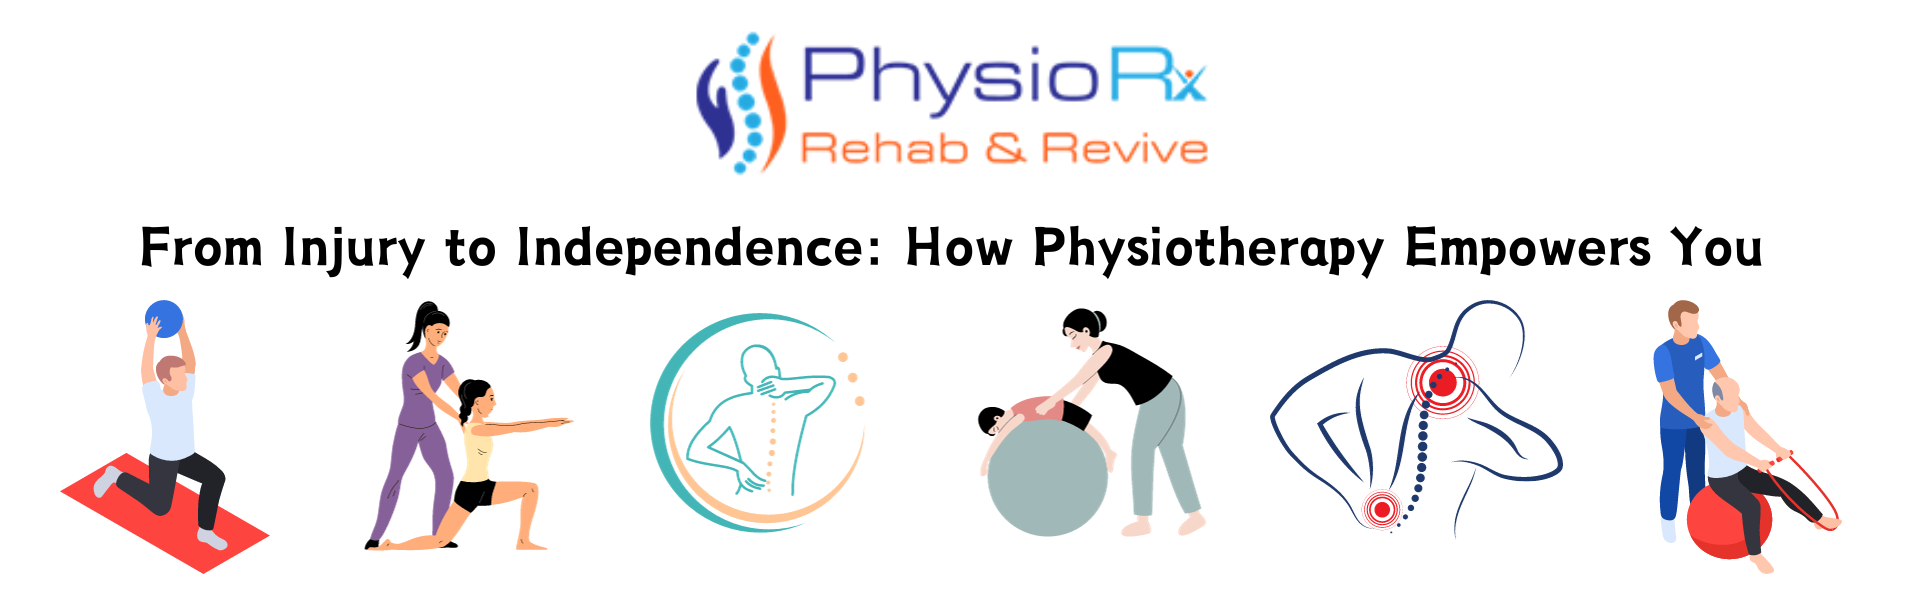 Physiotherapy Swindon